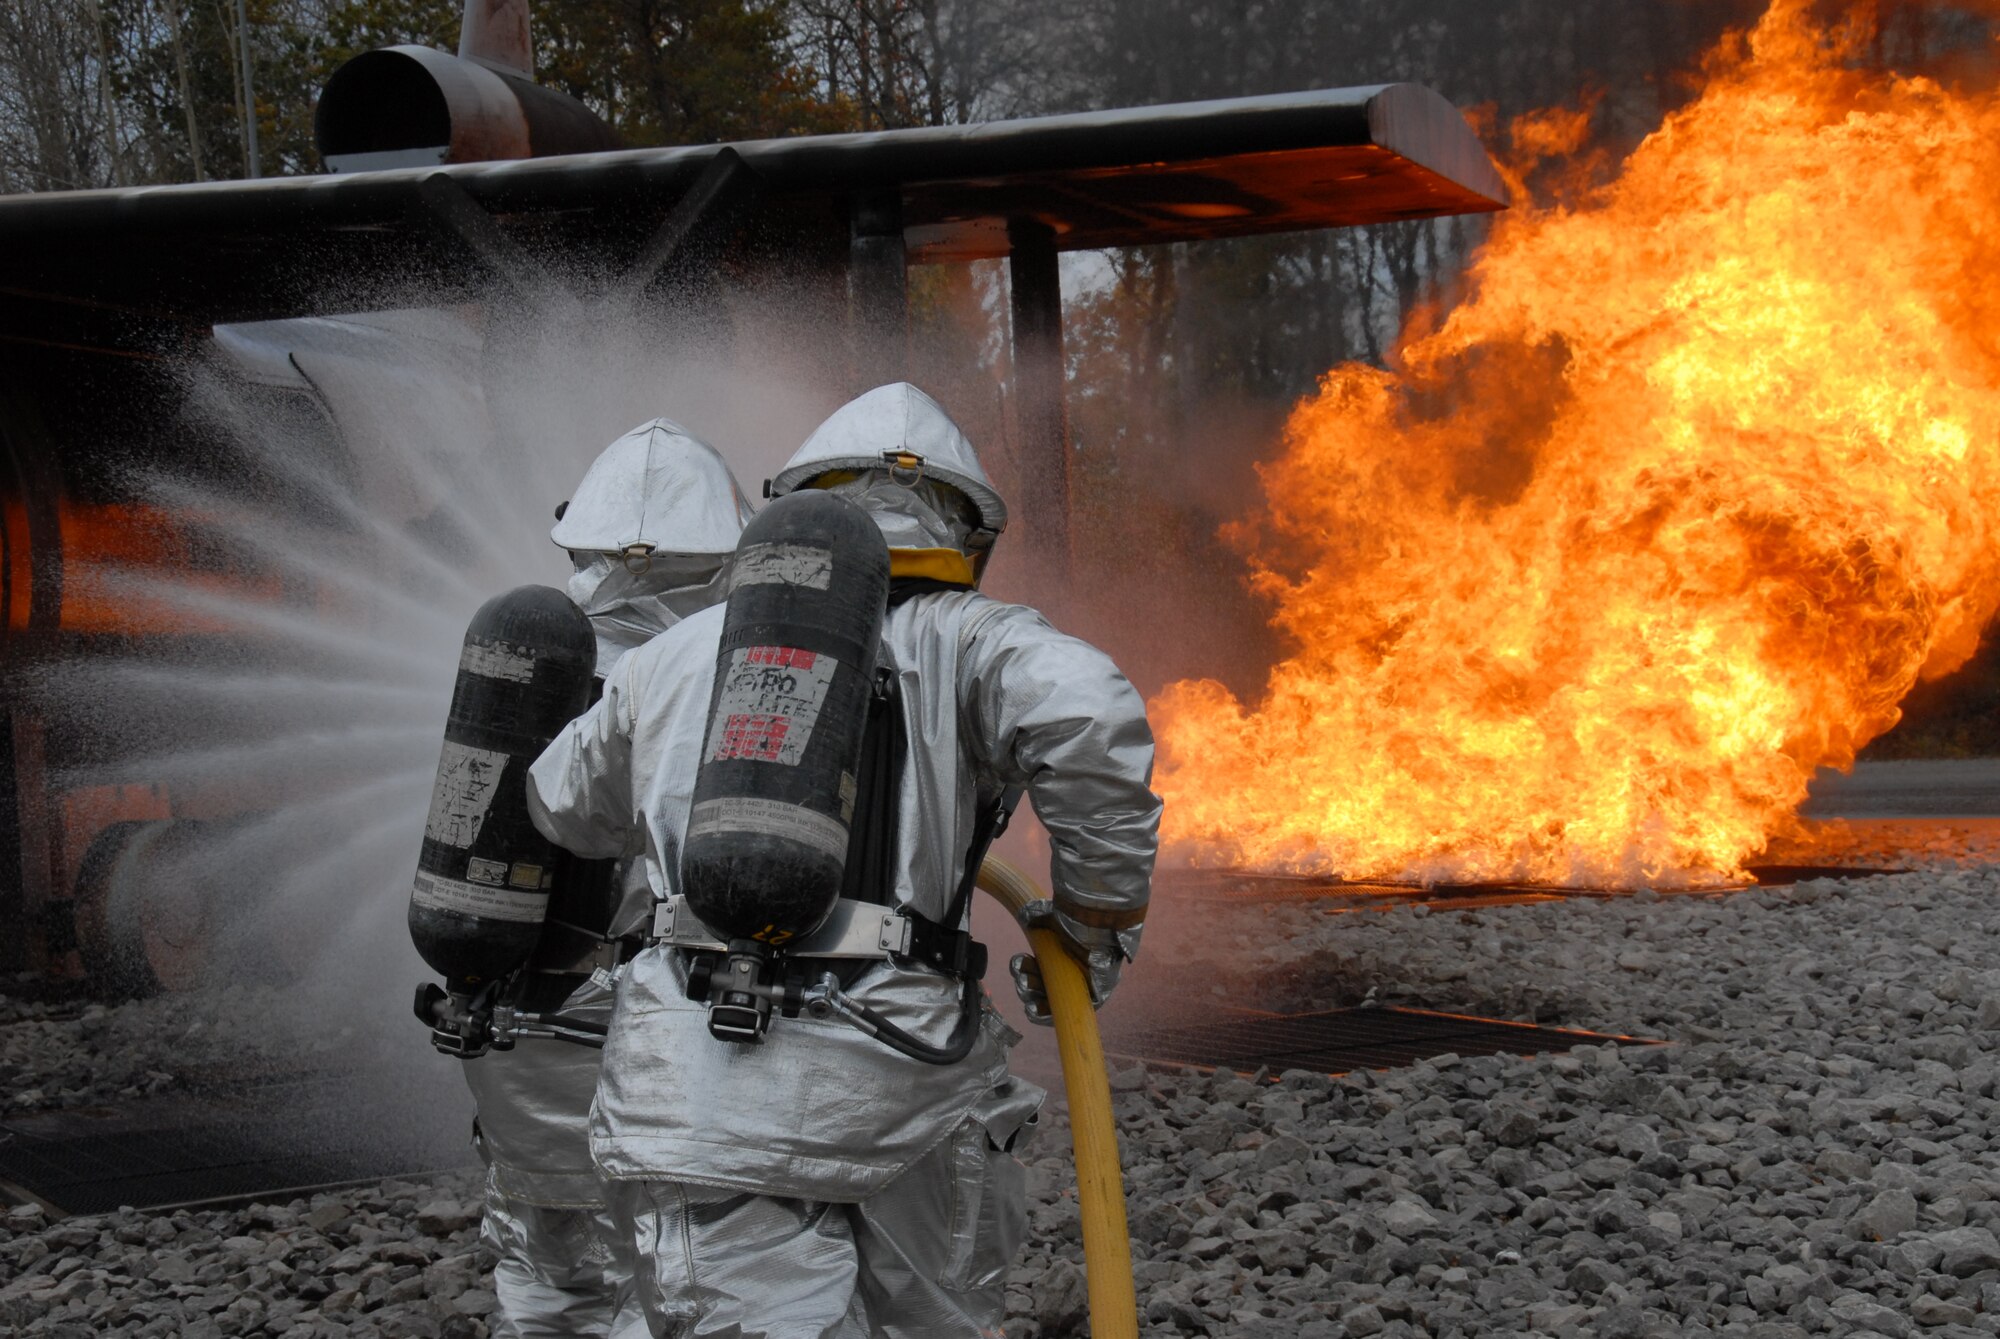 Two firefighters with the 127th Wing, Selfridge Air National Guard Base, Mich., combat a controlled fire to meet their annual training requirements at the Combat Readiness Training Center, Alpena, Mich., in October.  (U.S. Air Force Photos by SrA Anna-Marie Wyant) (Released)